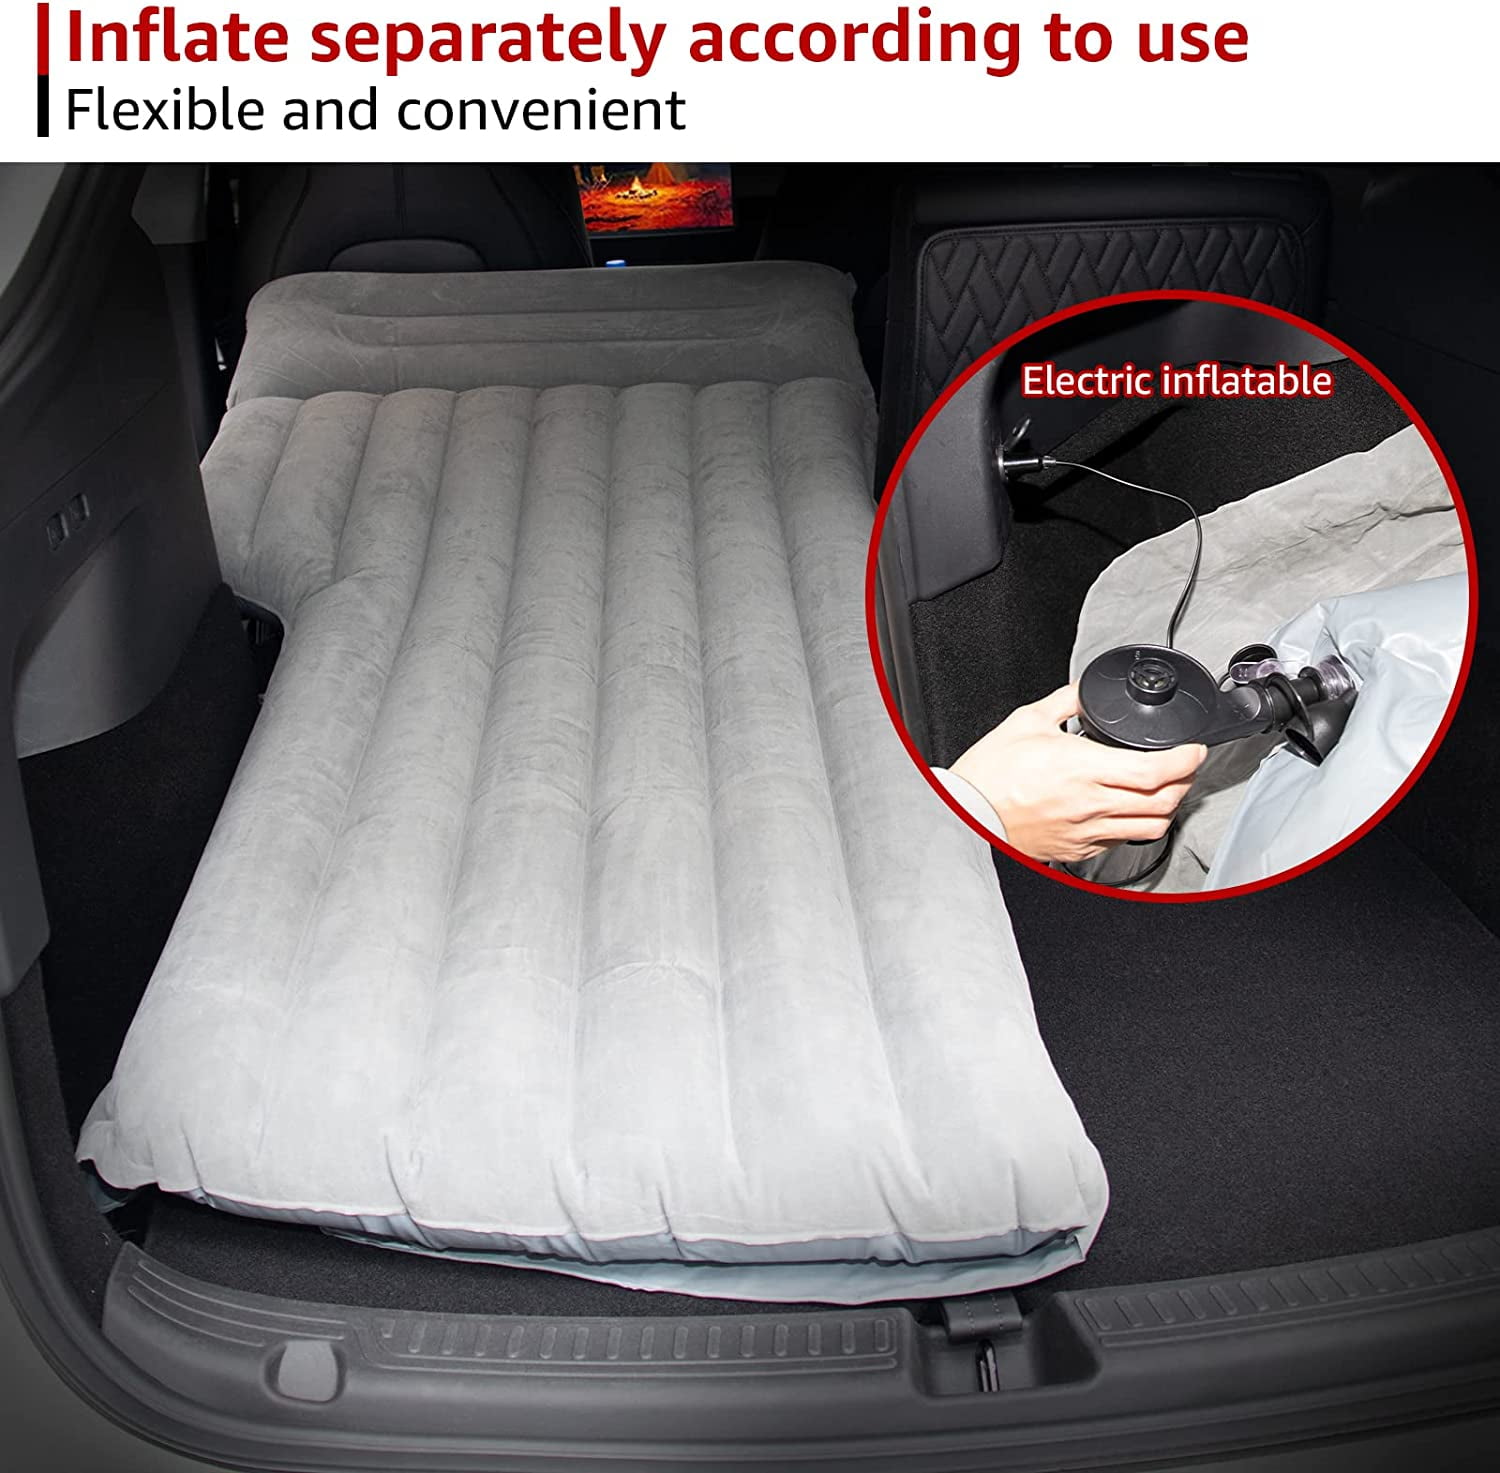 2017-20 Y Mattress Portable Camping Air Bed Cushion Inflatable Tesla Model 3 